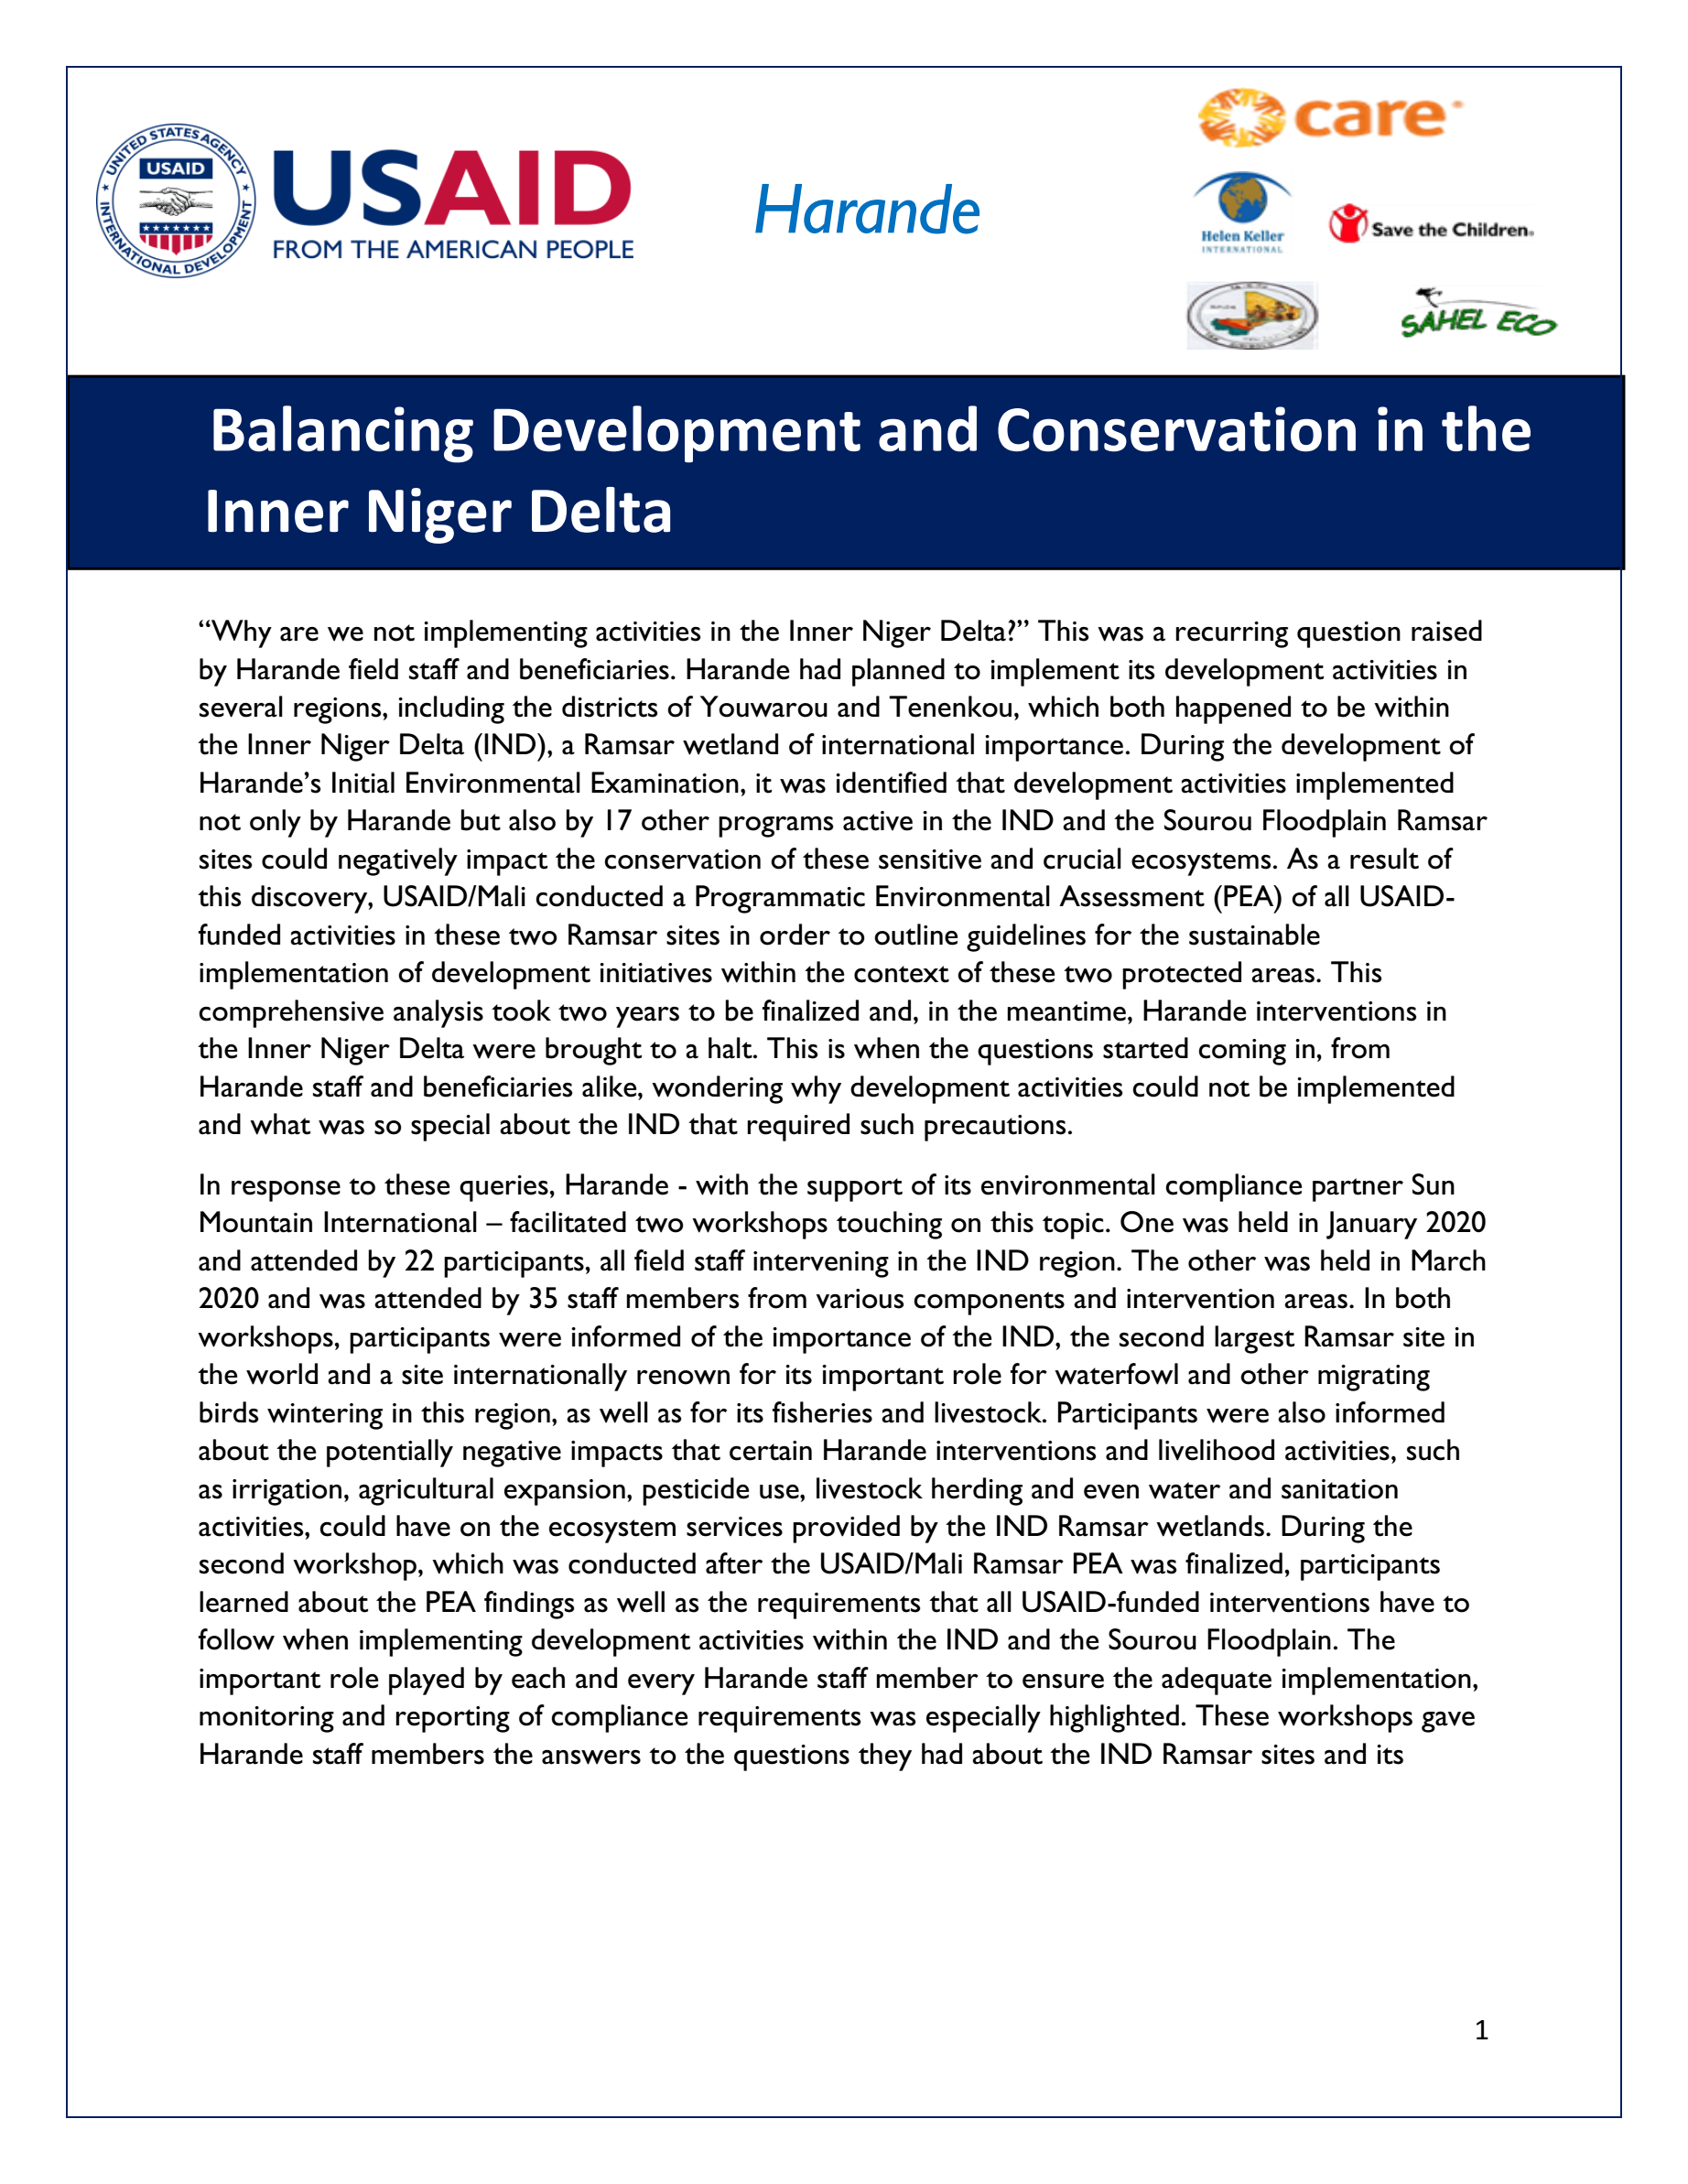 Balancing Development and Conservation in the Inner Niger Delta - Harande